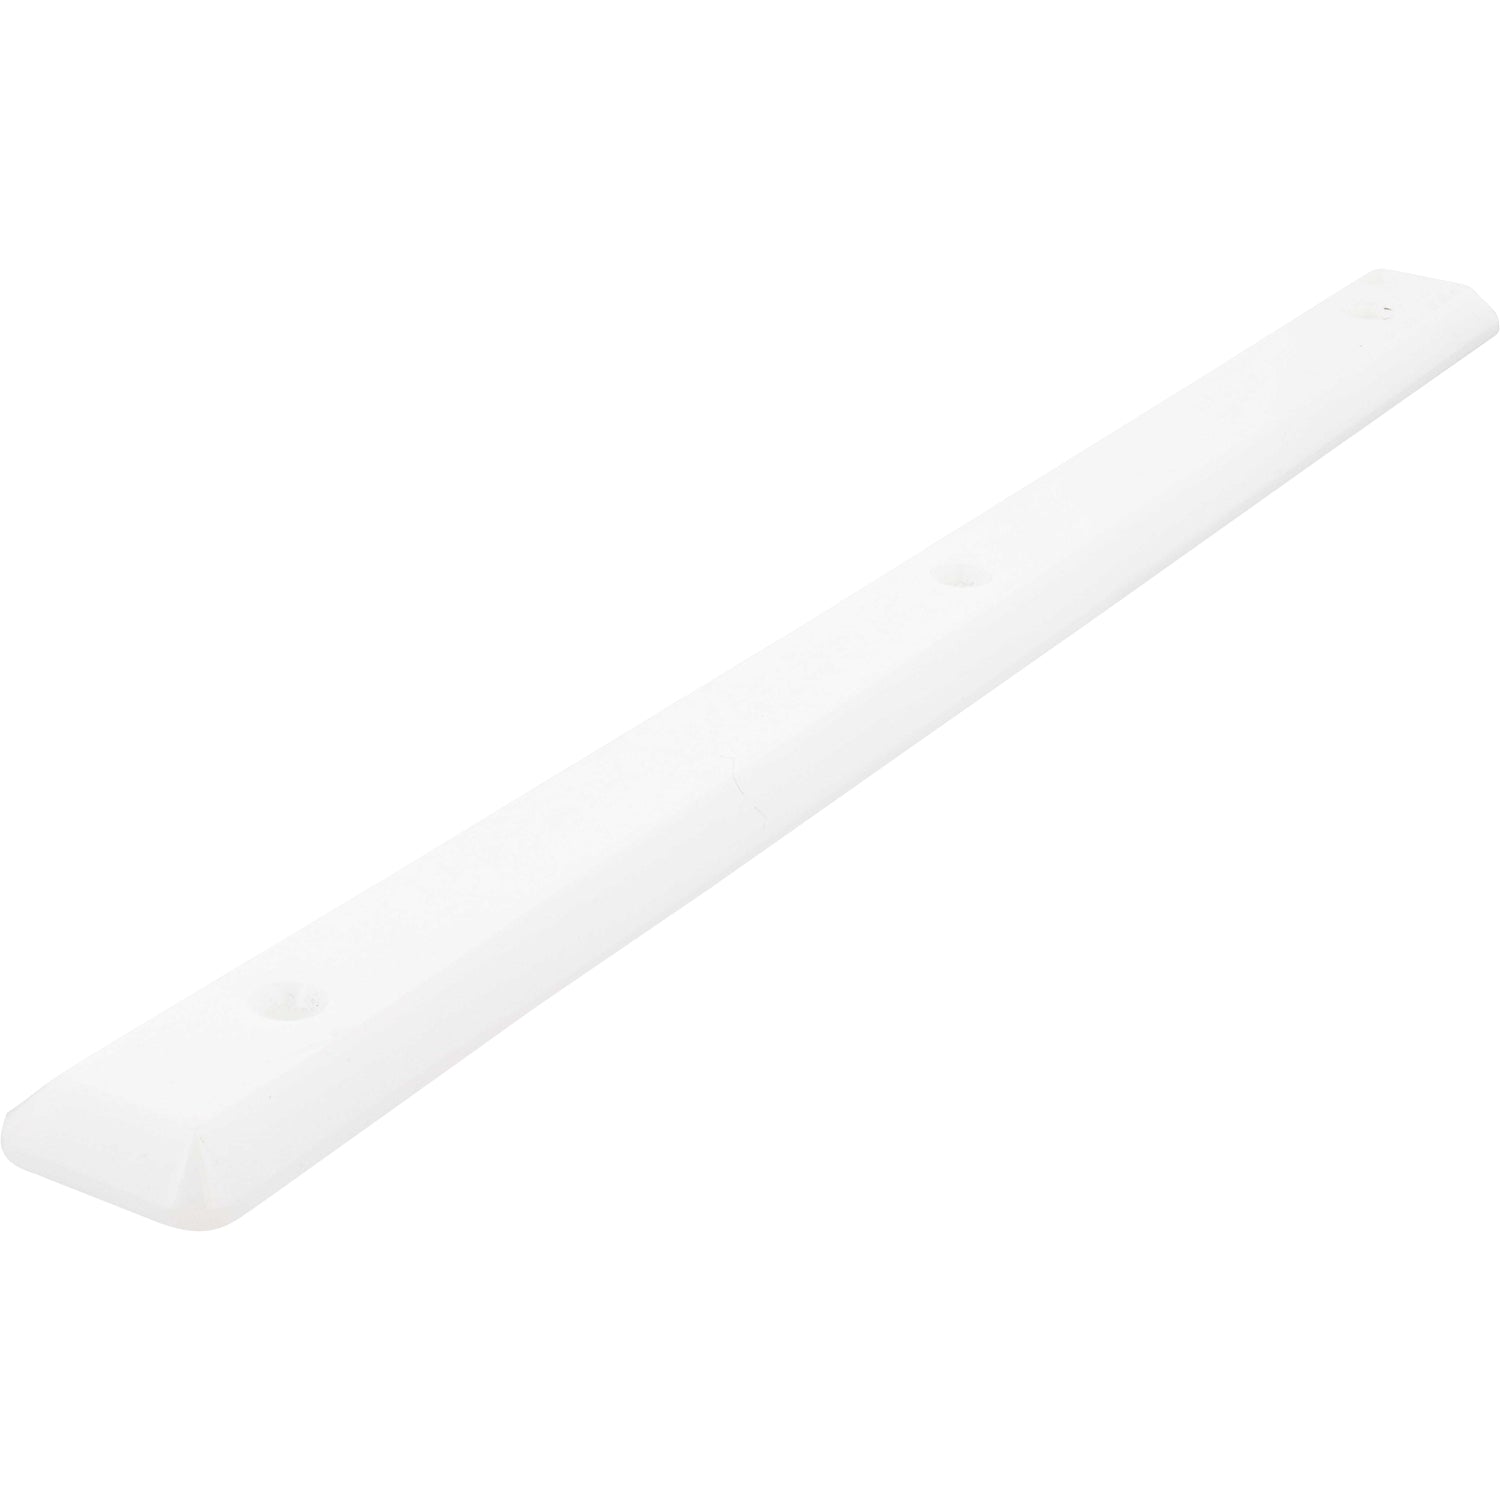 White rectangular HDPE plastic rail with three drilled mounting holes shown on white background.